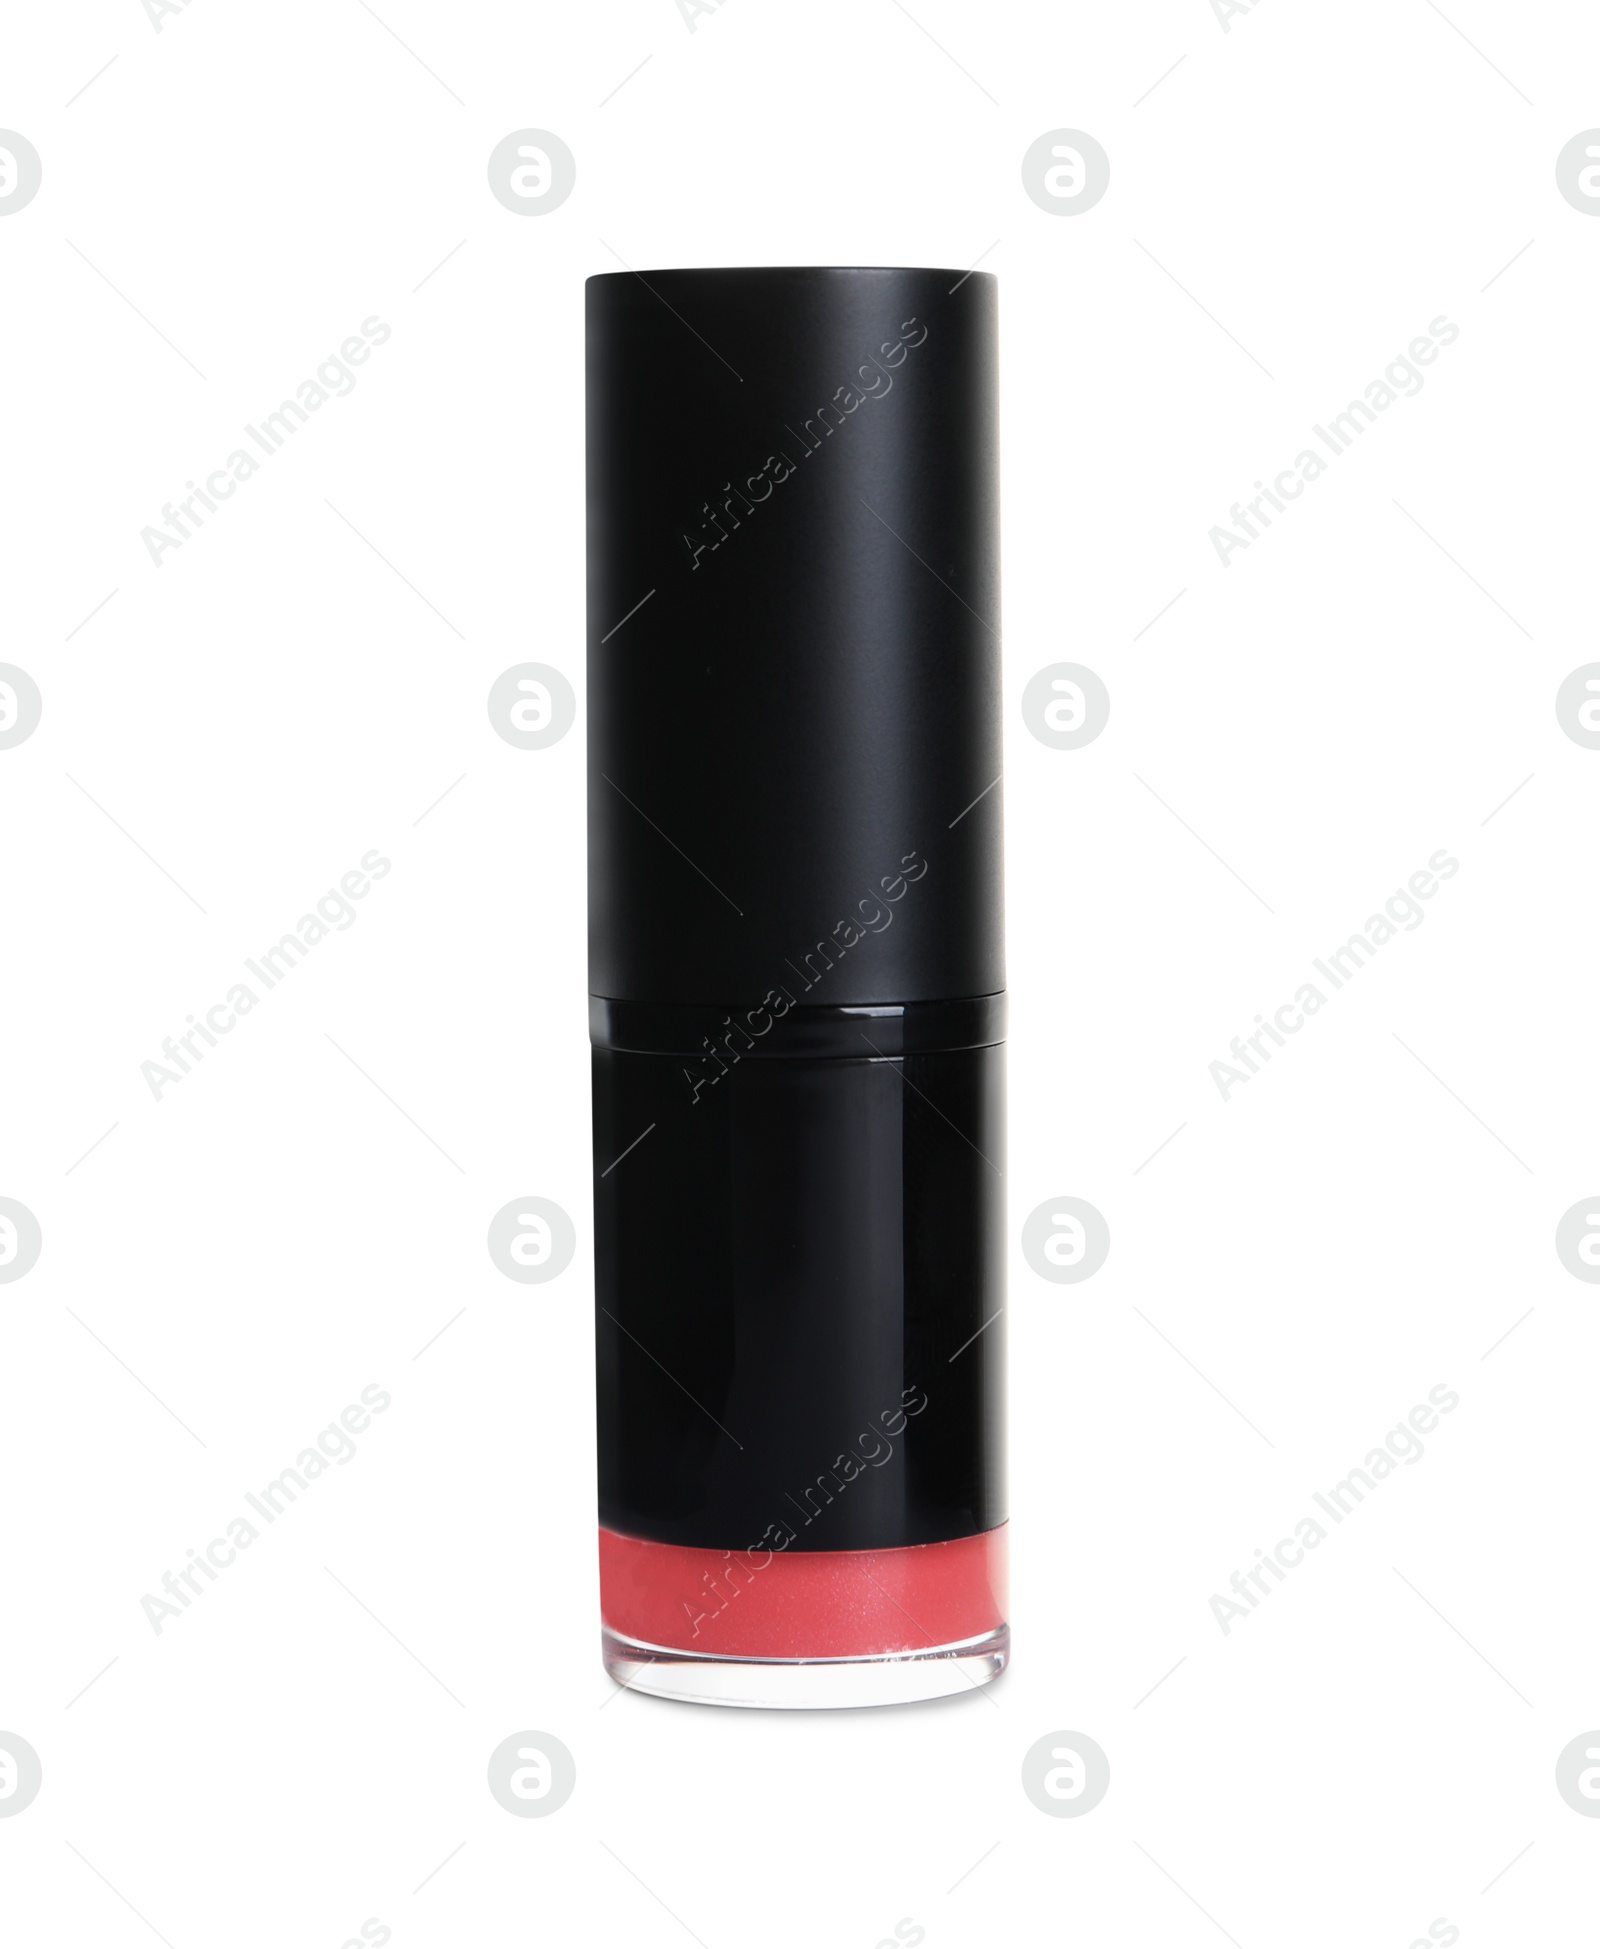 Photo of Lipstick on white background. Professional makeup product